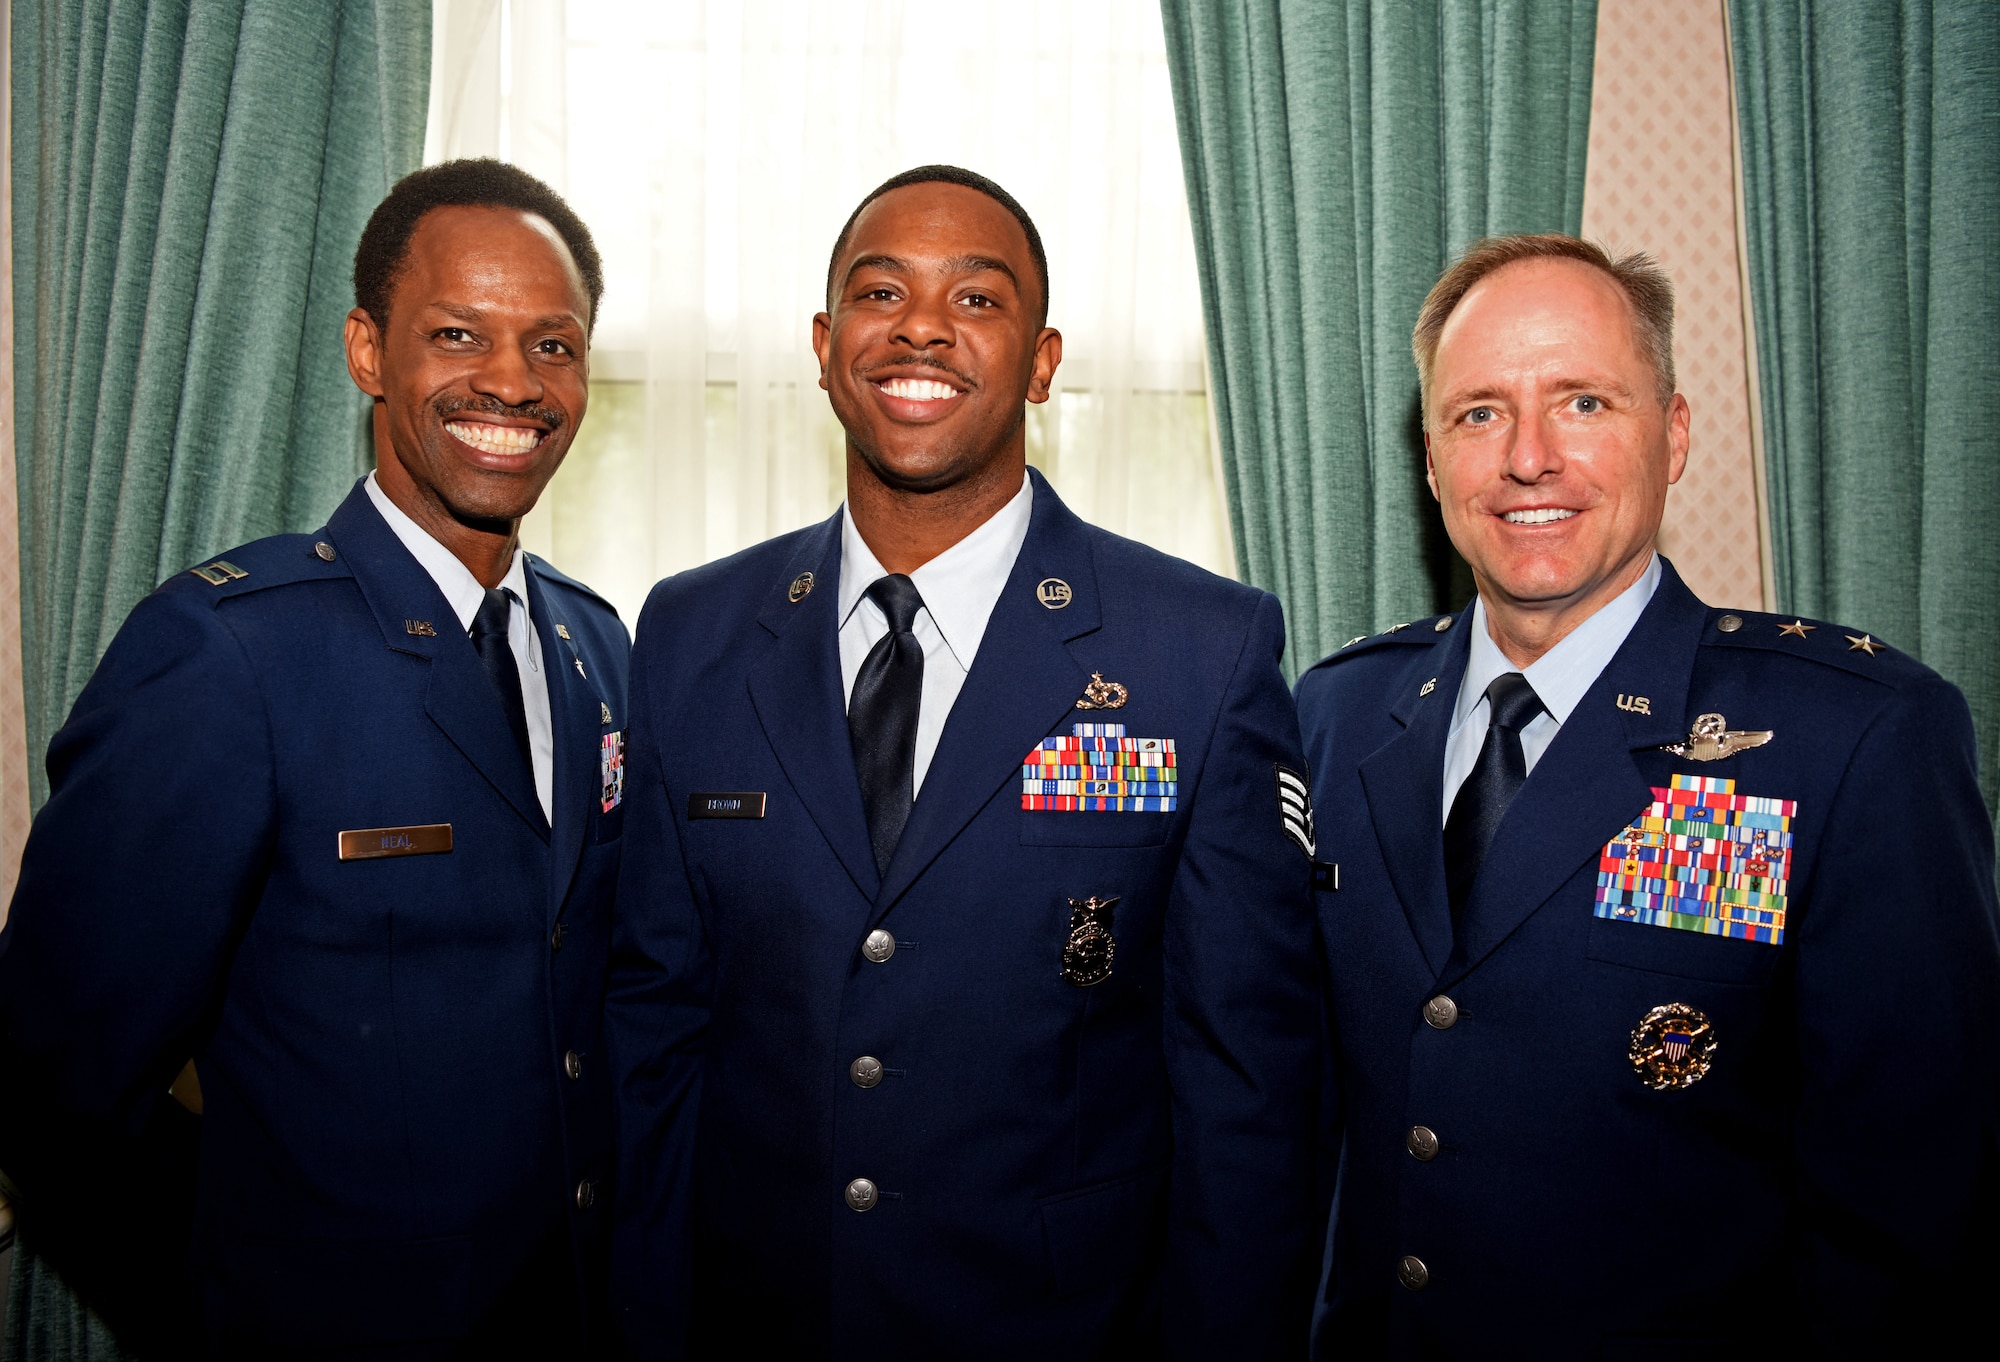 U.S. Air Force Capt. Kennie Neal, 100th Air Refueling Wing chaplain, Staff Sgt. Dajuantaye Brown, 100th Civil Engineer Squadron crew chief, and Maj. Gen. John Wood, Third Air Force commander, pose for a photo during a visit to RAF Mildenhall, England, May 31, 2019. Wood spent time during his visit to discuss leadership and acknowledge the hard work the Airmen of the 100th ARW displays each day. (U.S. Air Force photo by Airman 1st Class Brandon Esau)